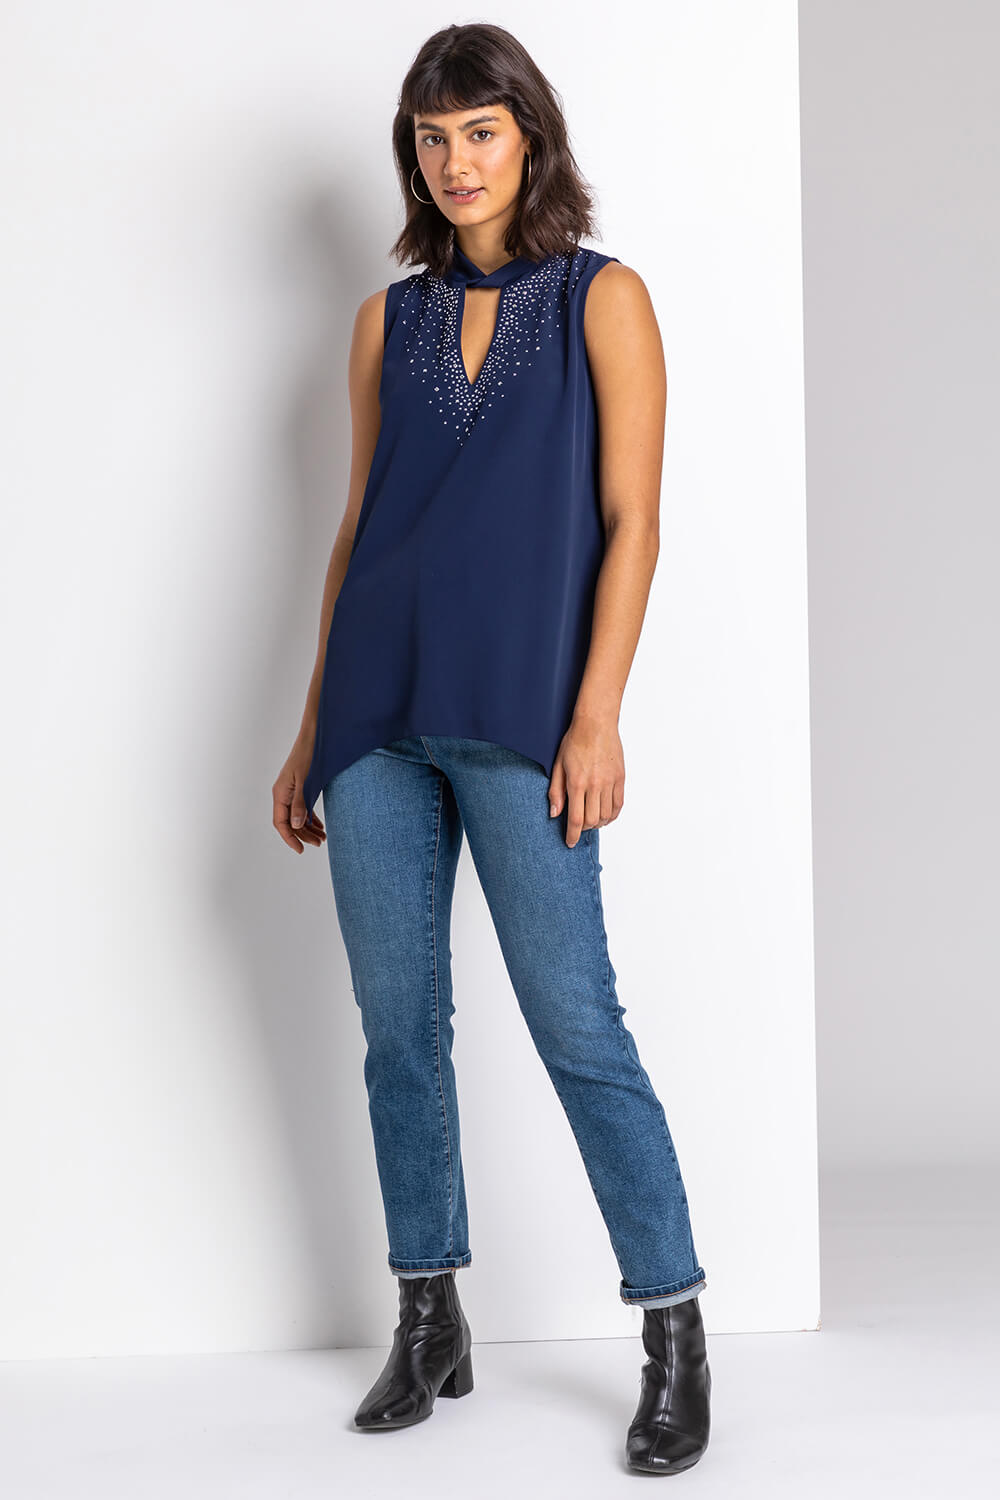 Navy  Sparkle High Neck Keyhole Top, Image 2 of 4